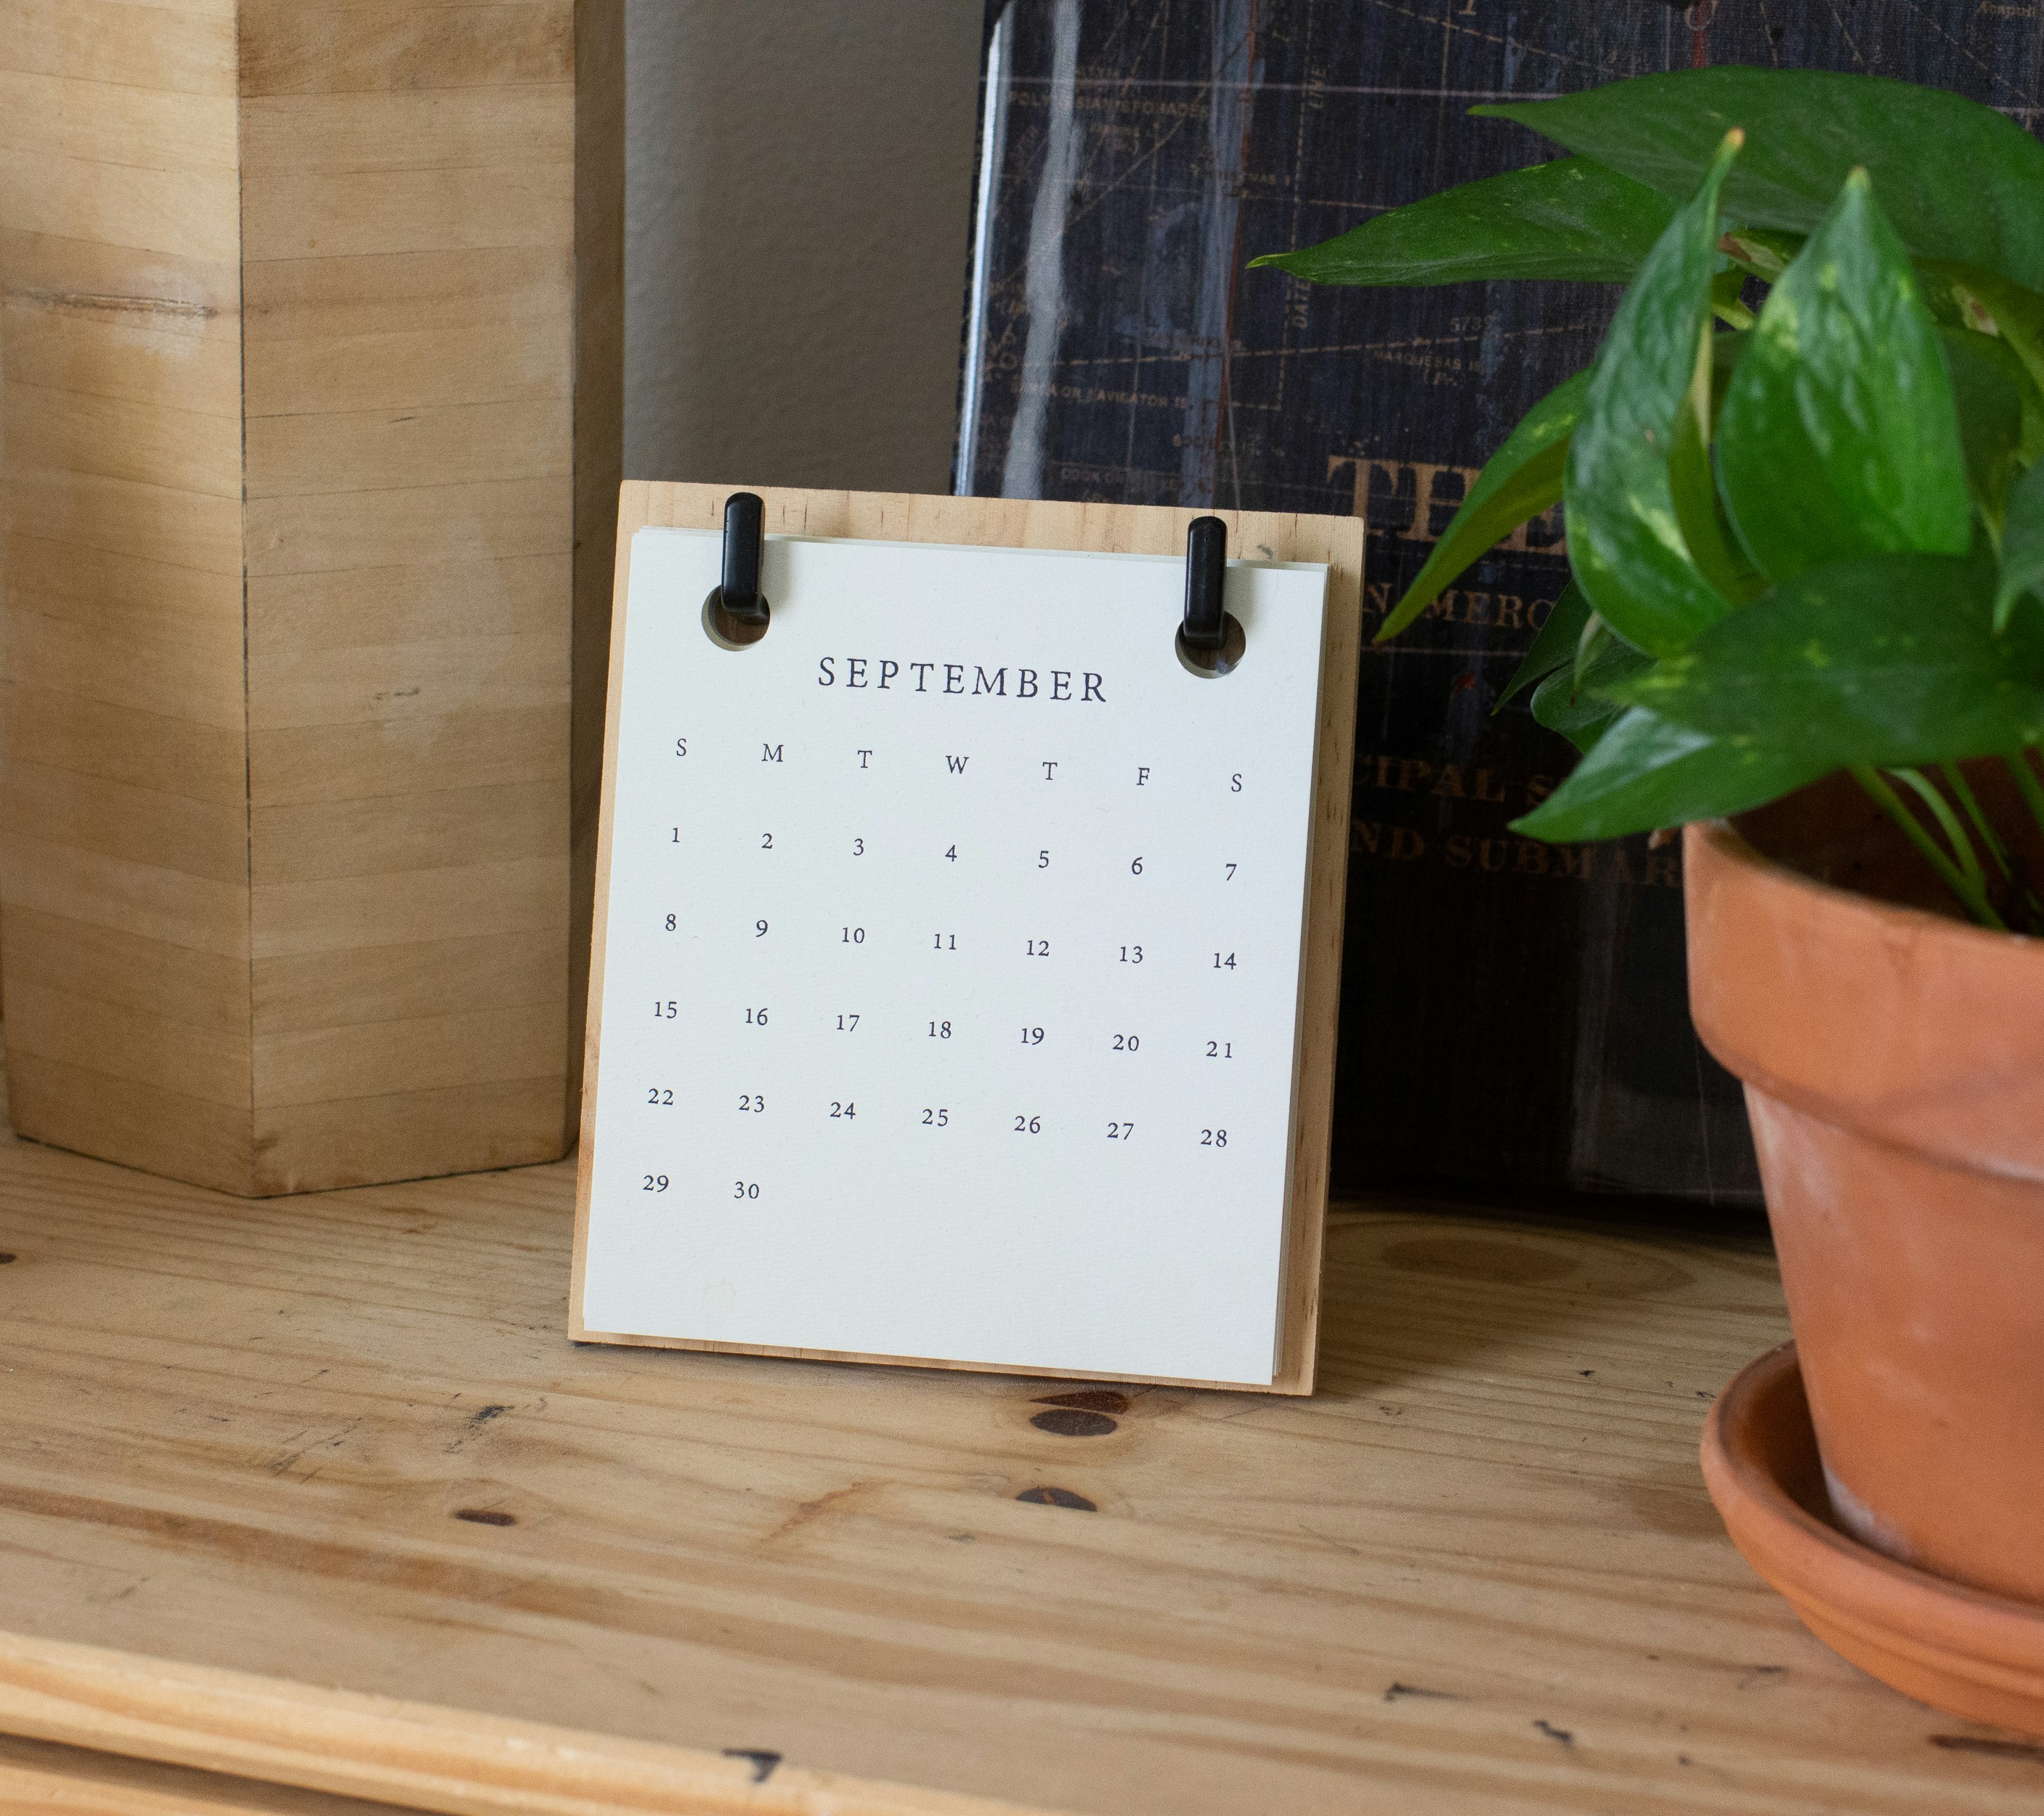 Dresser top with mini calendar of September and potted plant